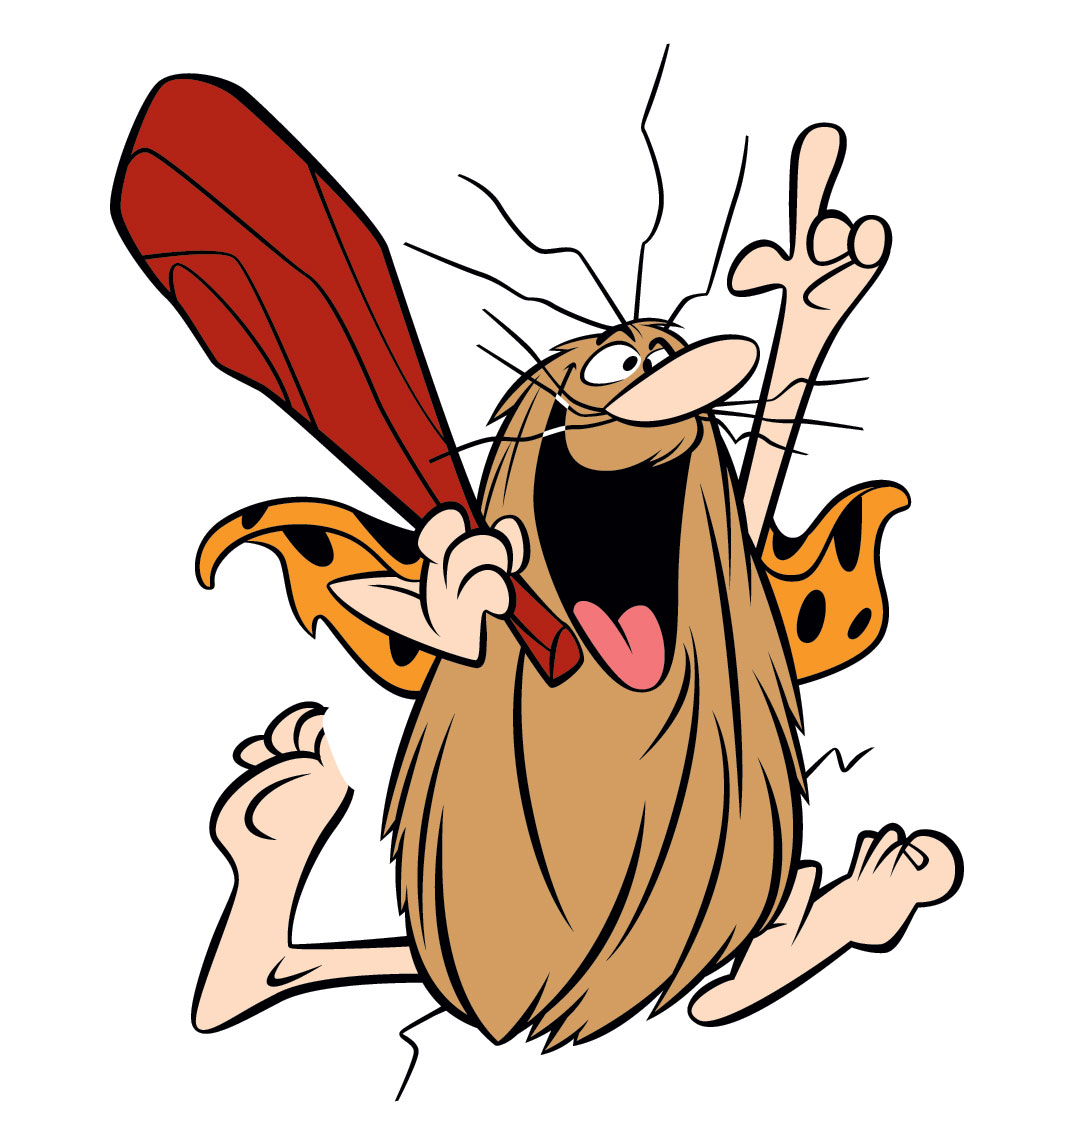 Caveman clipart ripped. Chosen one of the